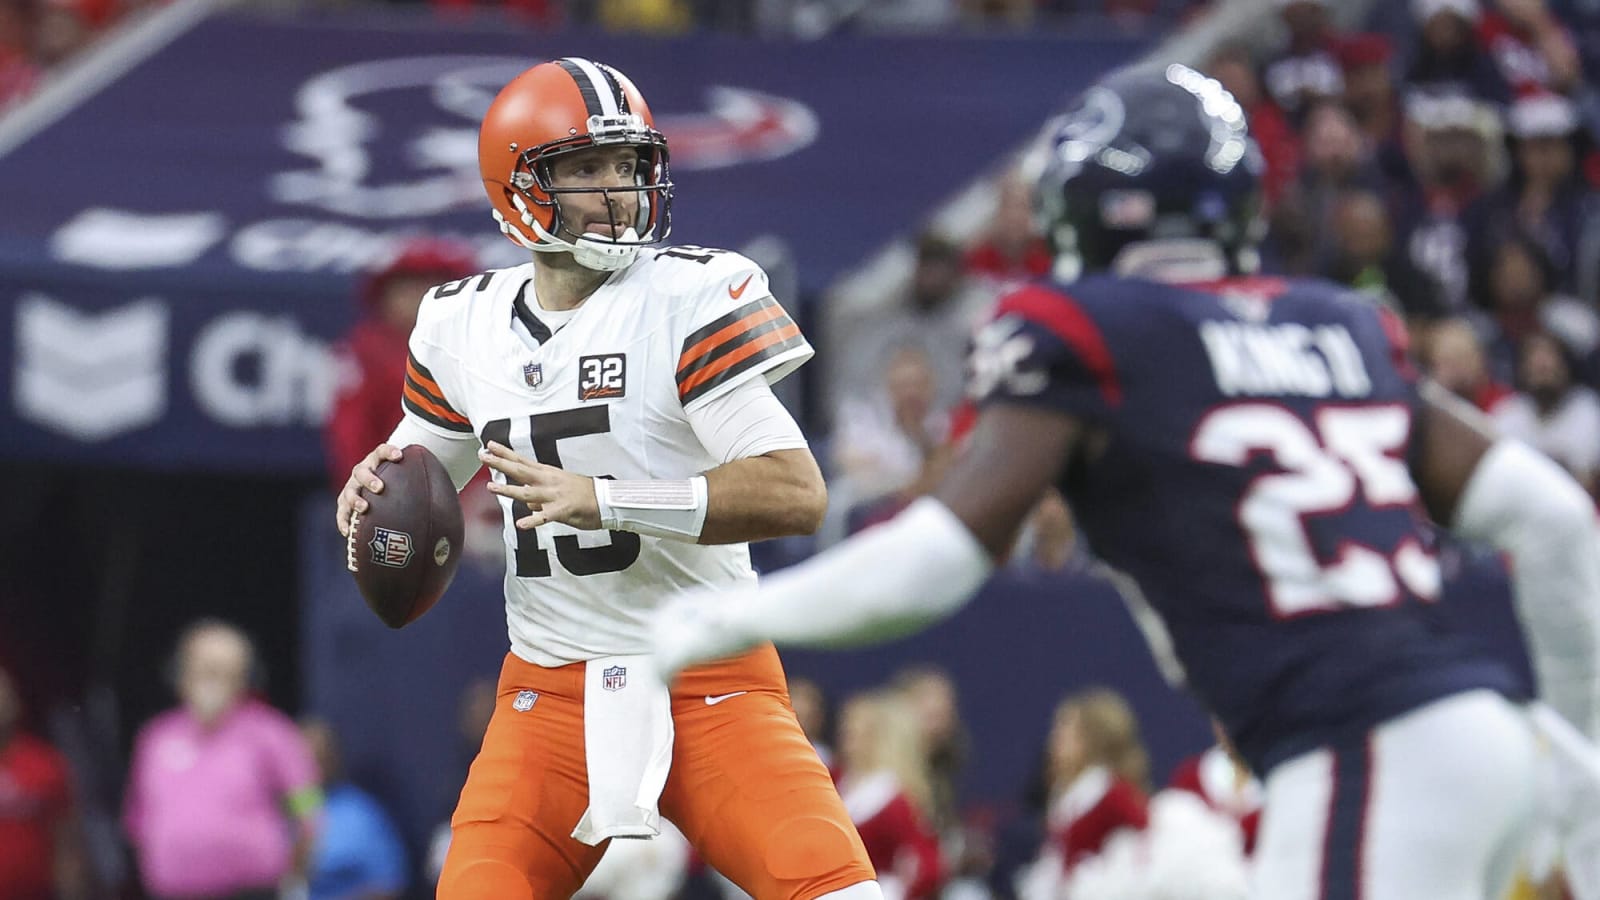 For Browns-Jets, a tease if you please